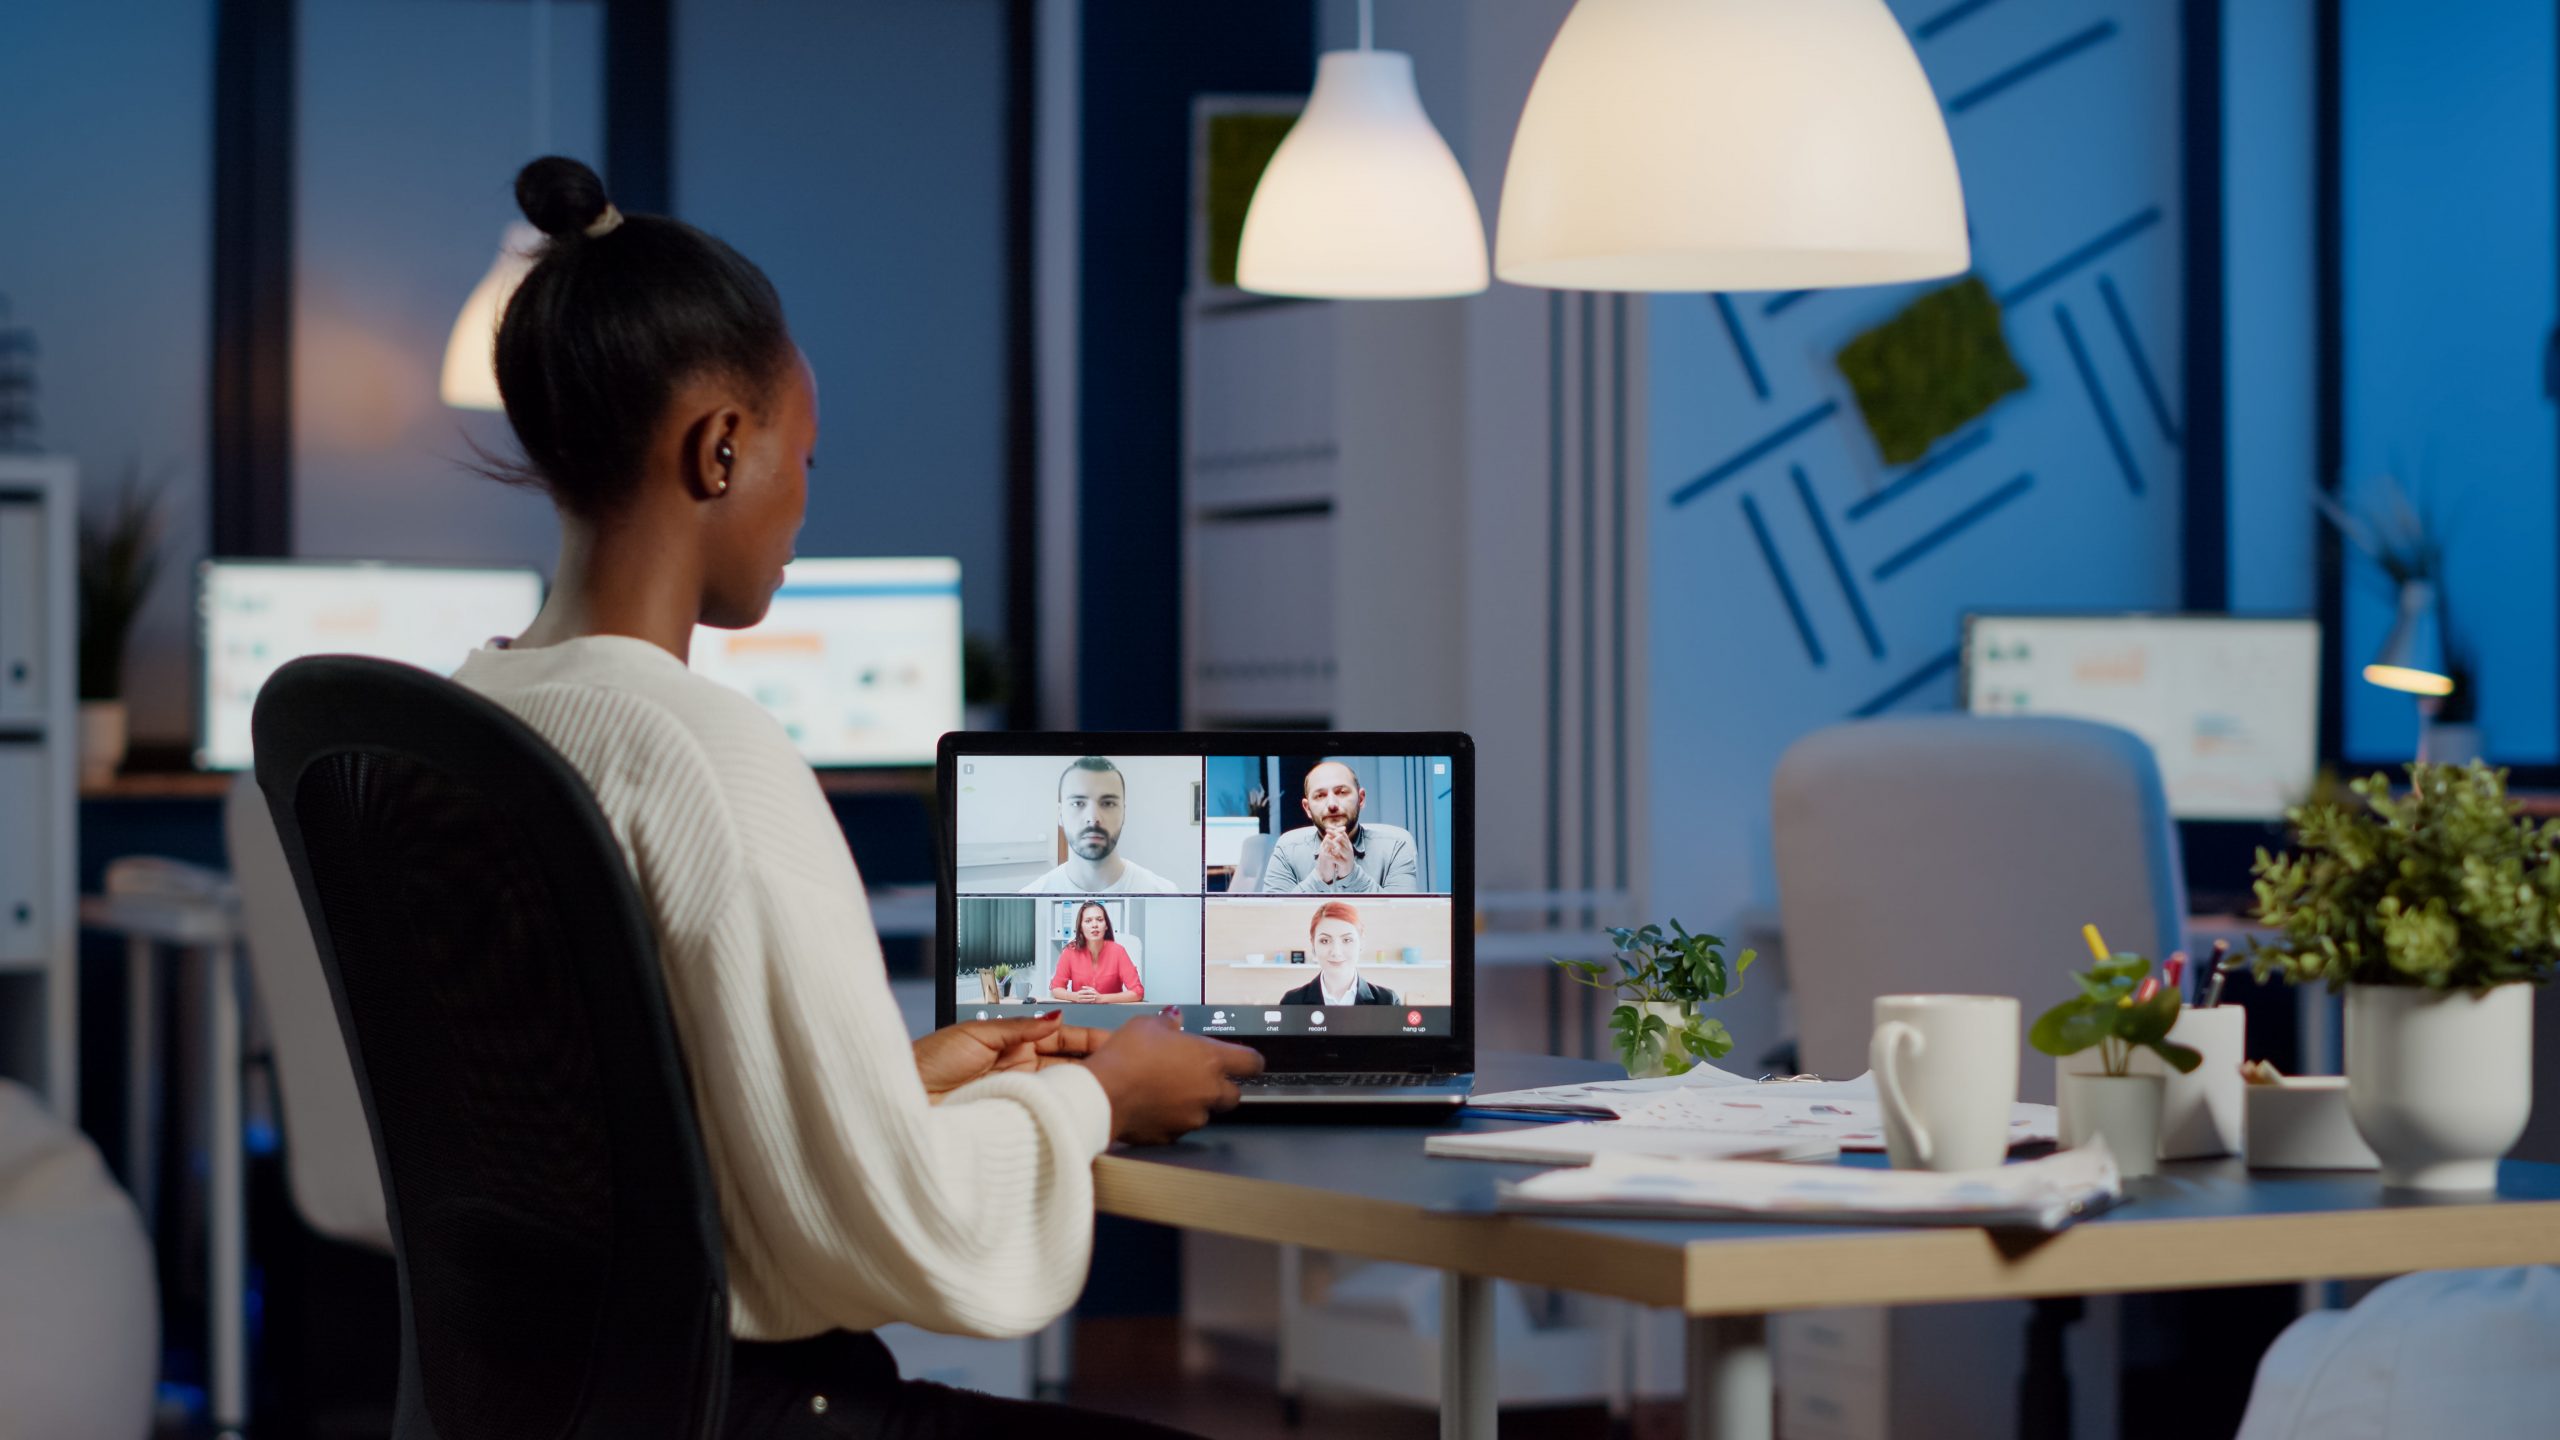 5 Benefits of Hiring Remote Workers To Grow Your Business